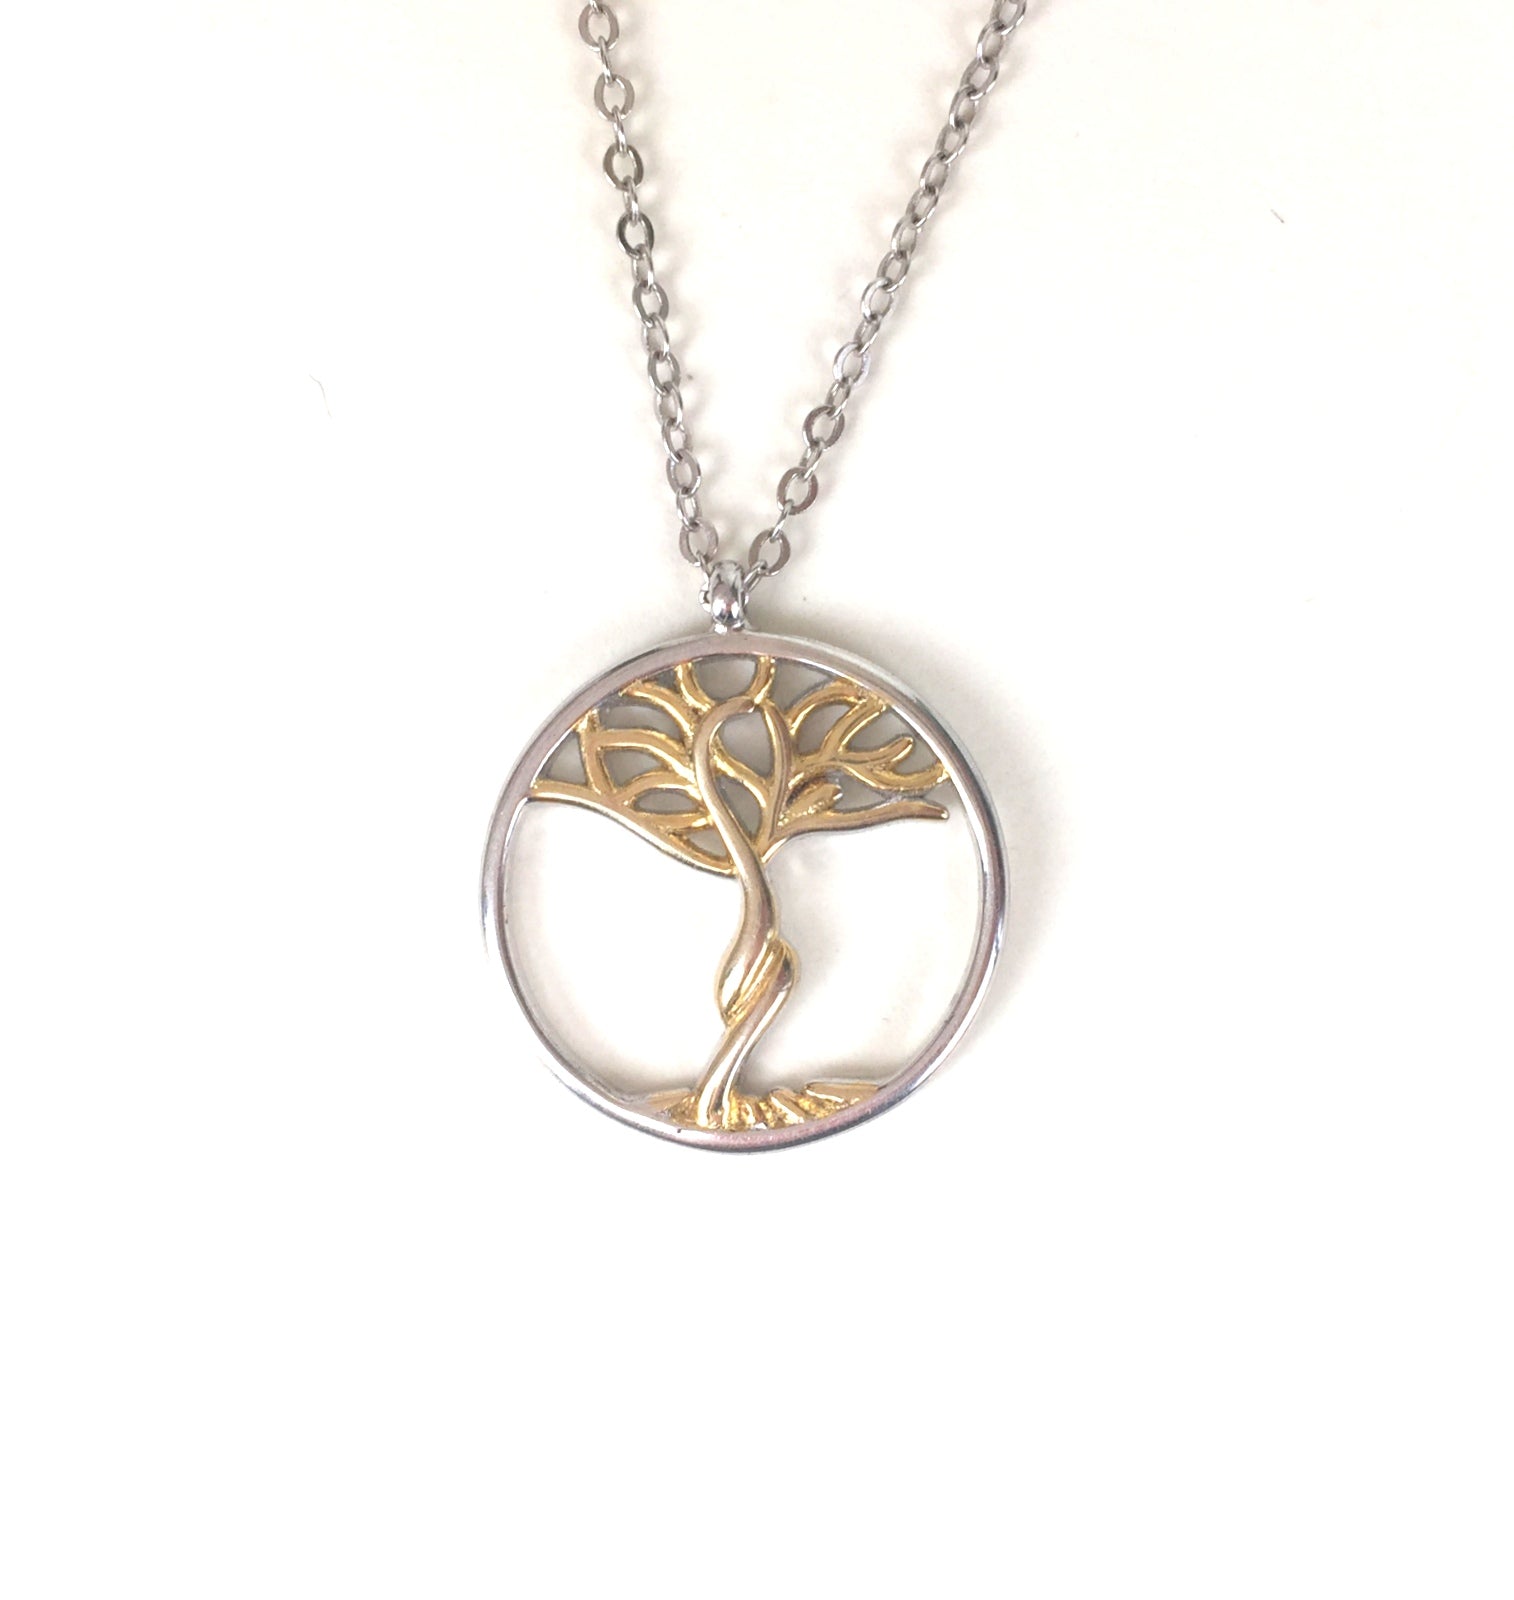 TWO TONE TREE OF LIFE STERLING SILVER NECKLACE